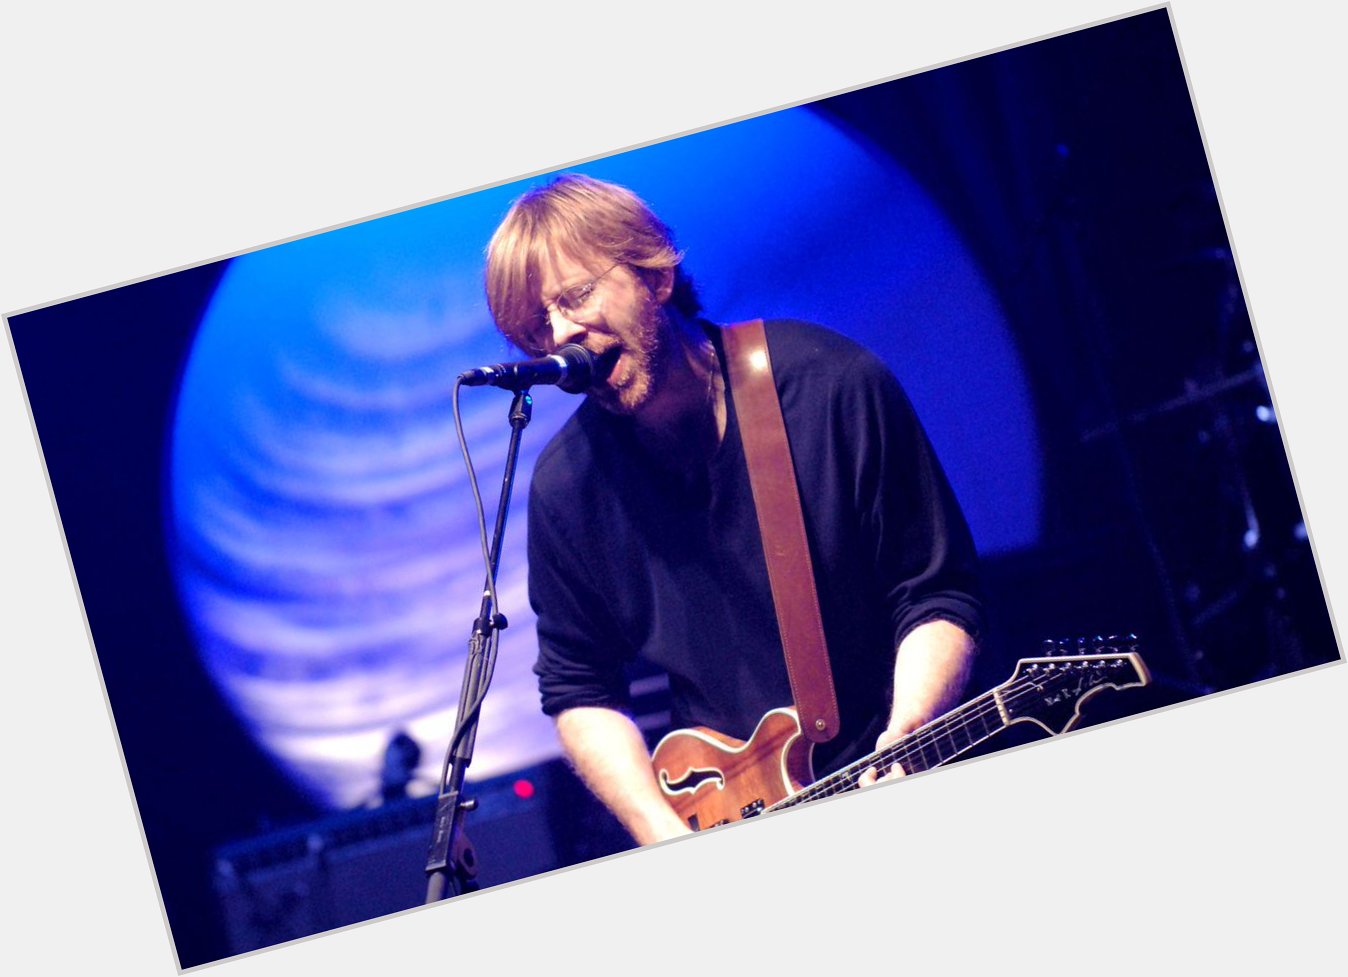 Happy birthday Trey Anastasio! Read our 2006 Q&amp;A where he shares his first psychedelic 